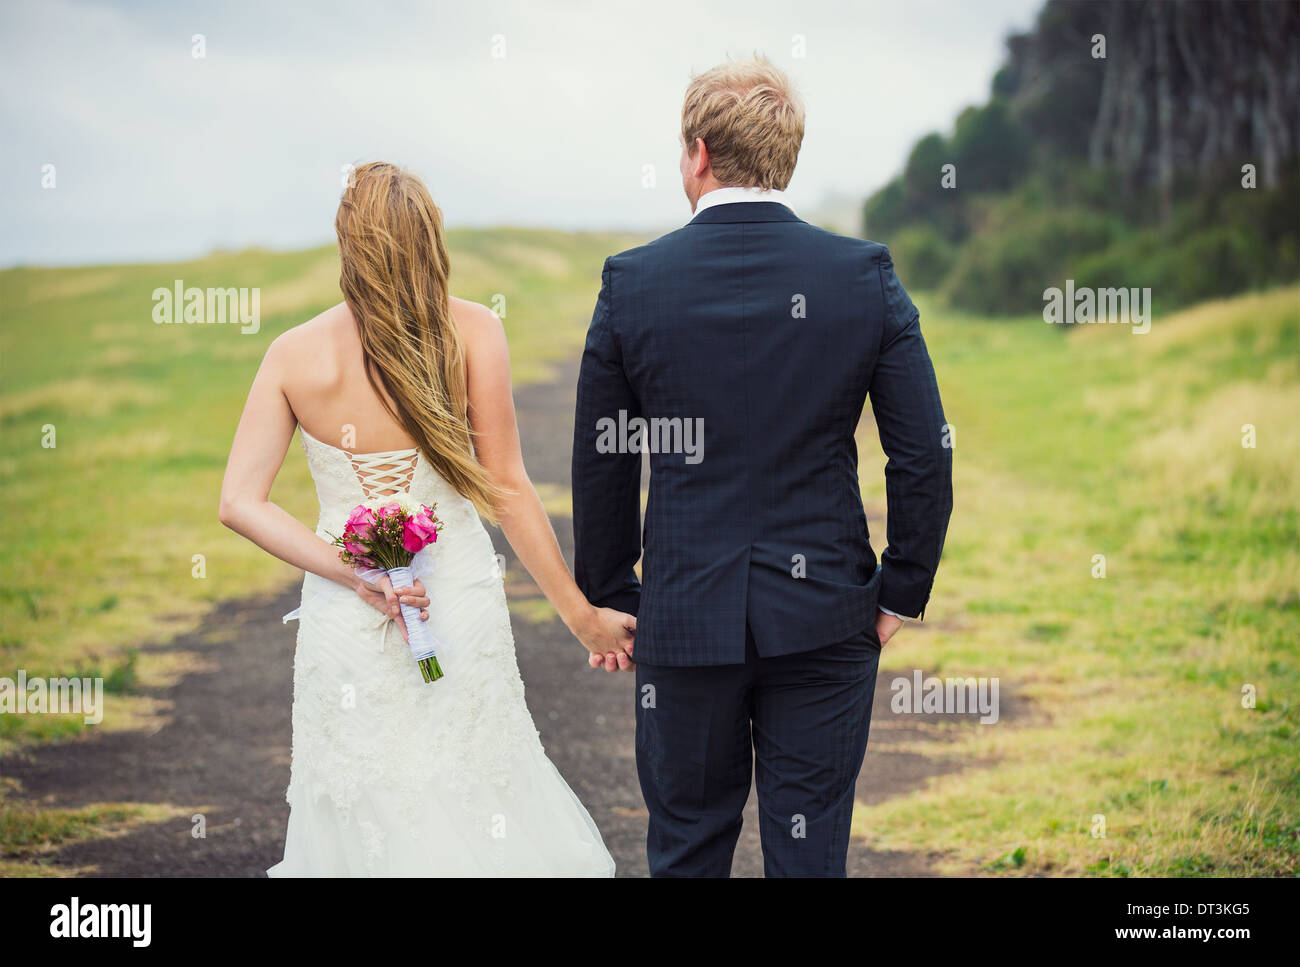 Wedding Couple in the Countryside, Happy Romantic Bride and Groom, Stock Photo